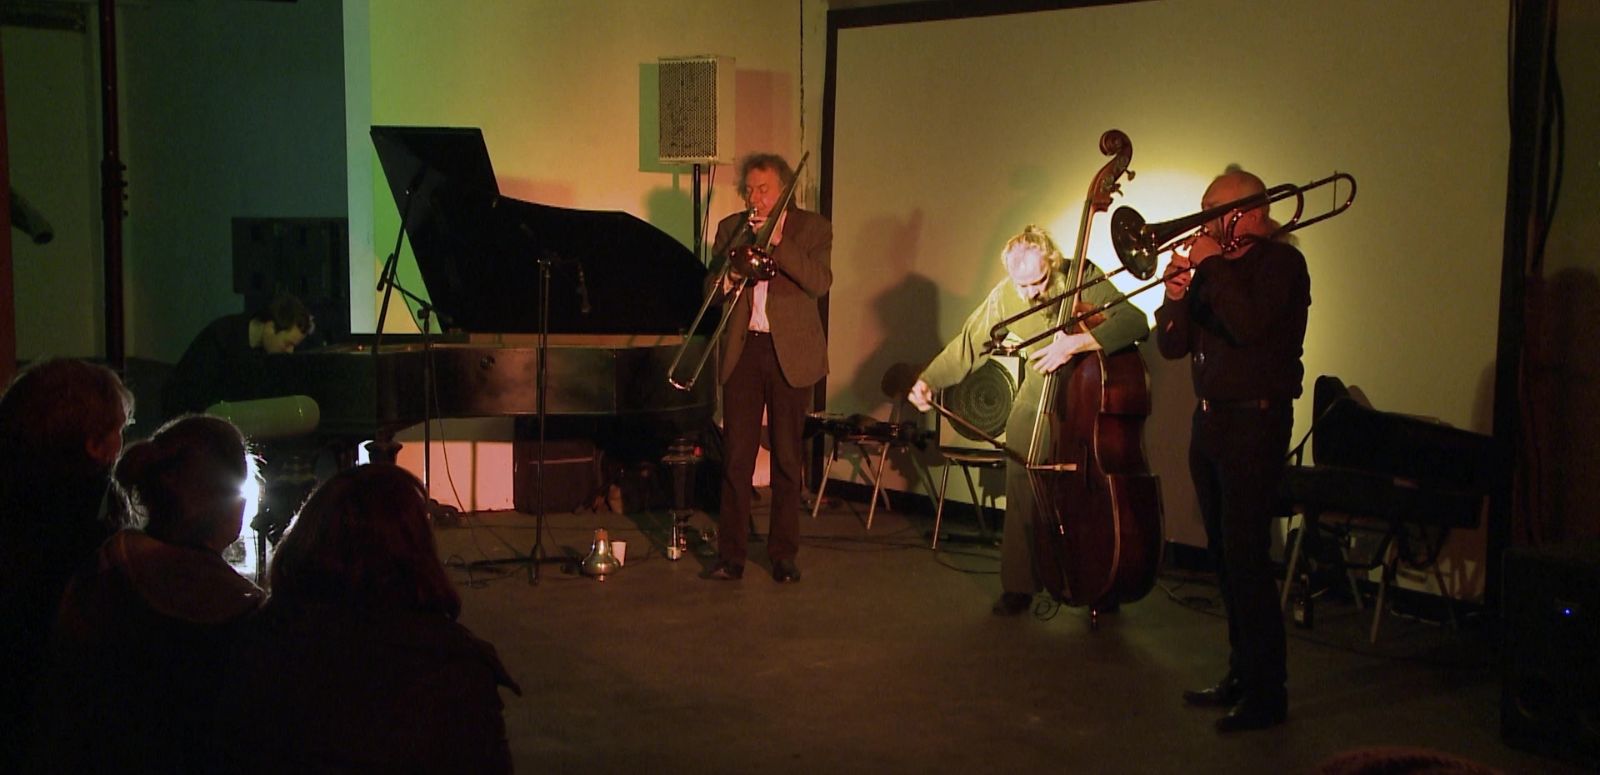 A pianist, two trombonists and a double bassist play in front of an audience in a small room.